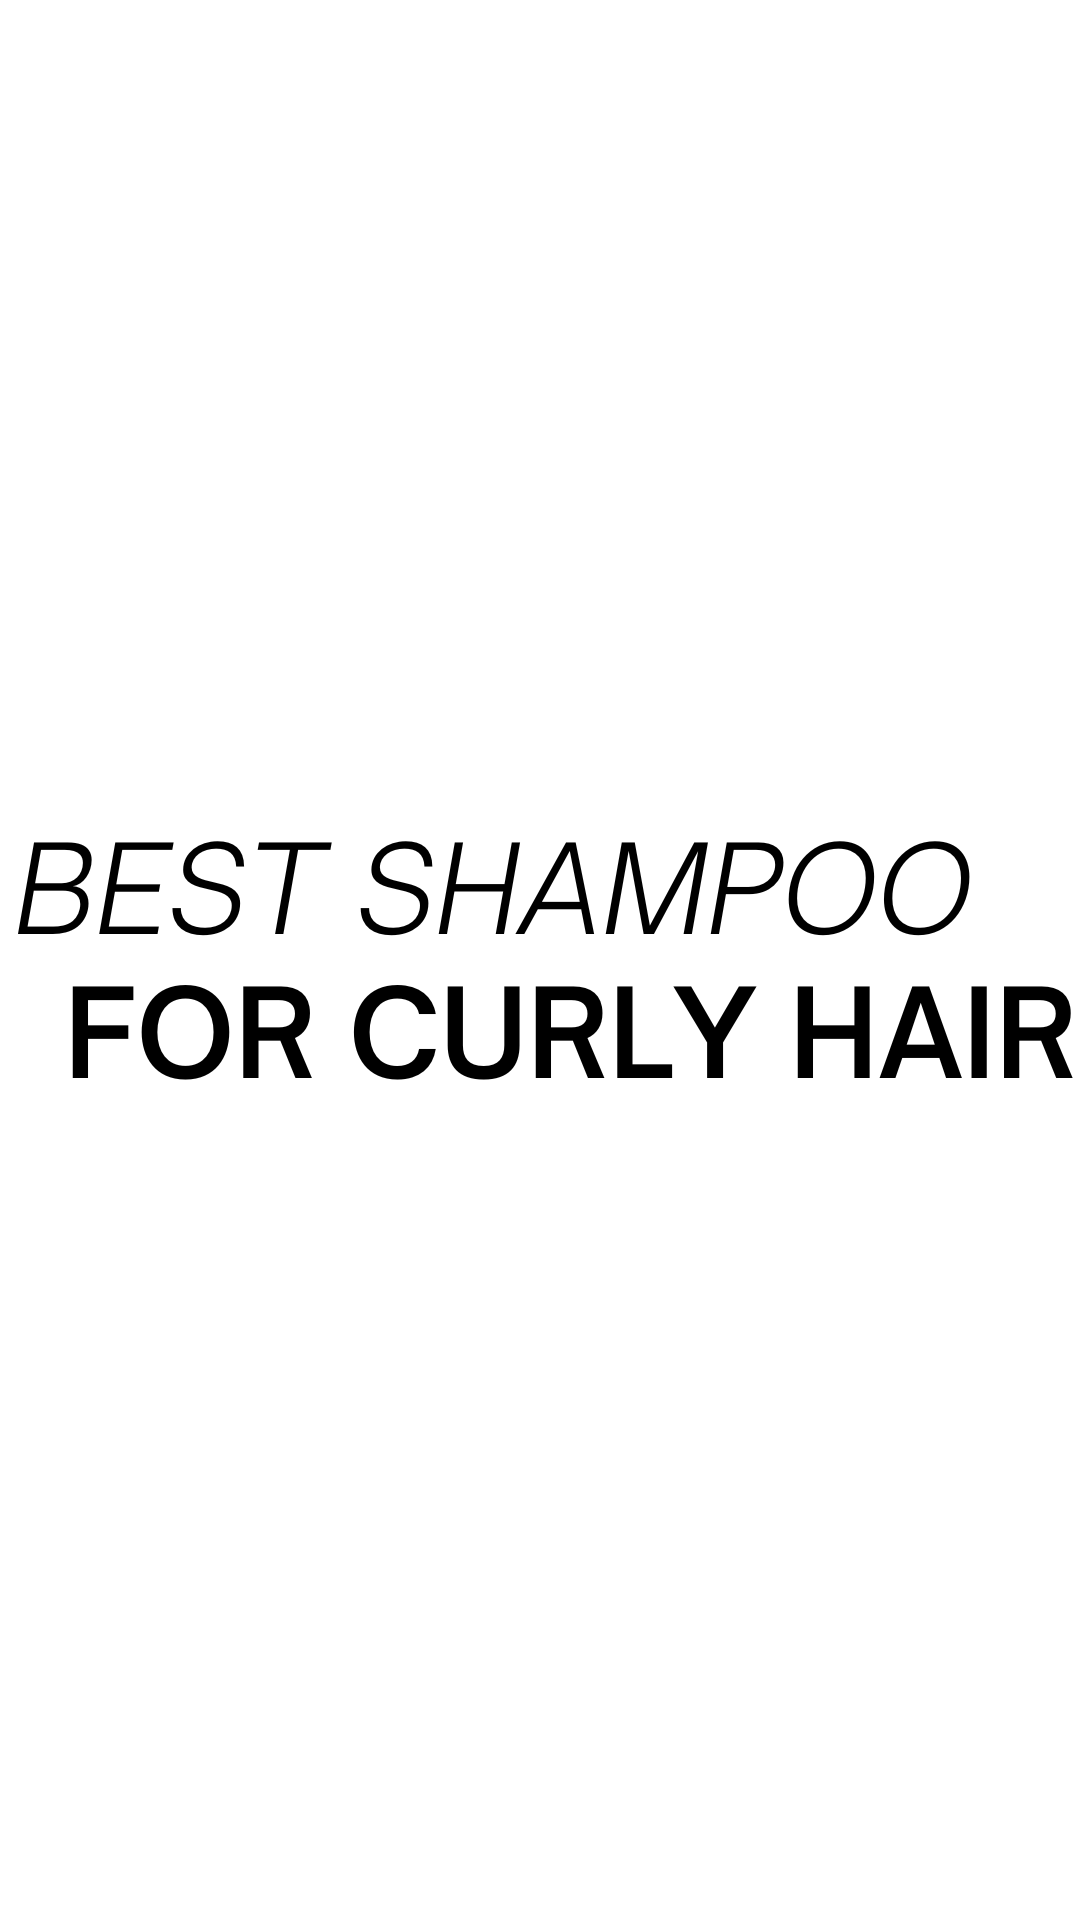 The Best Shampoo For Curly Hair